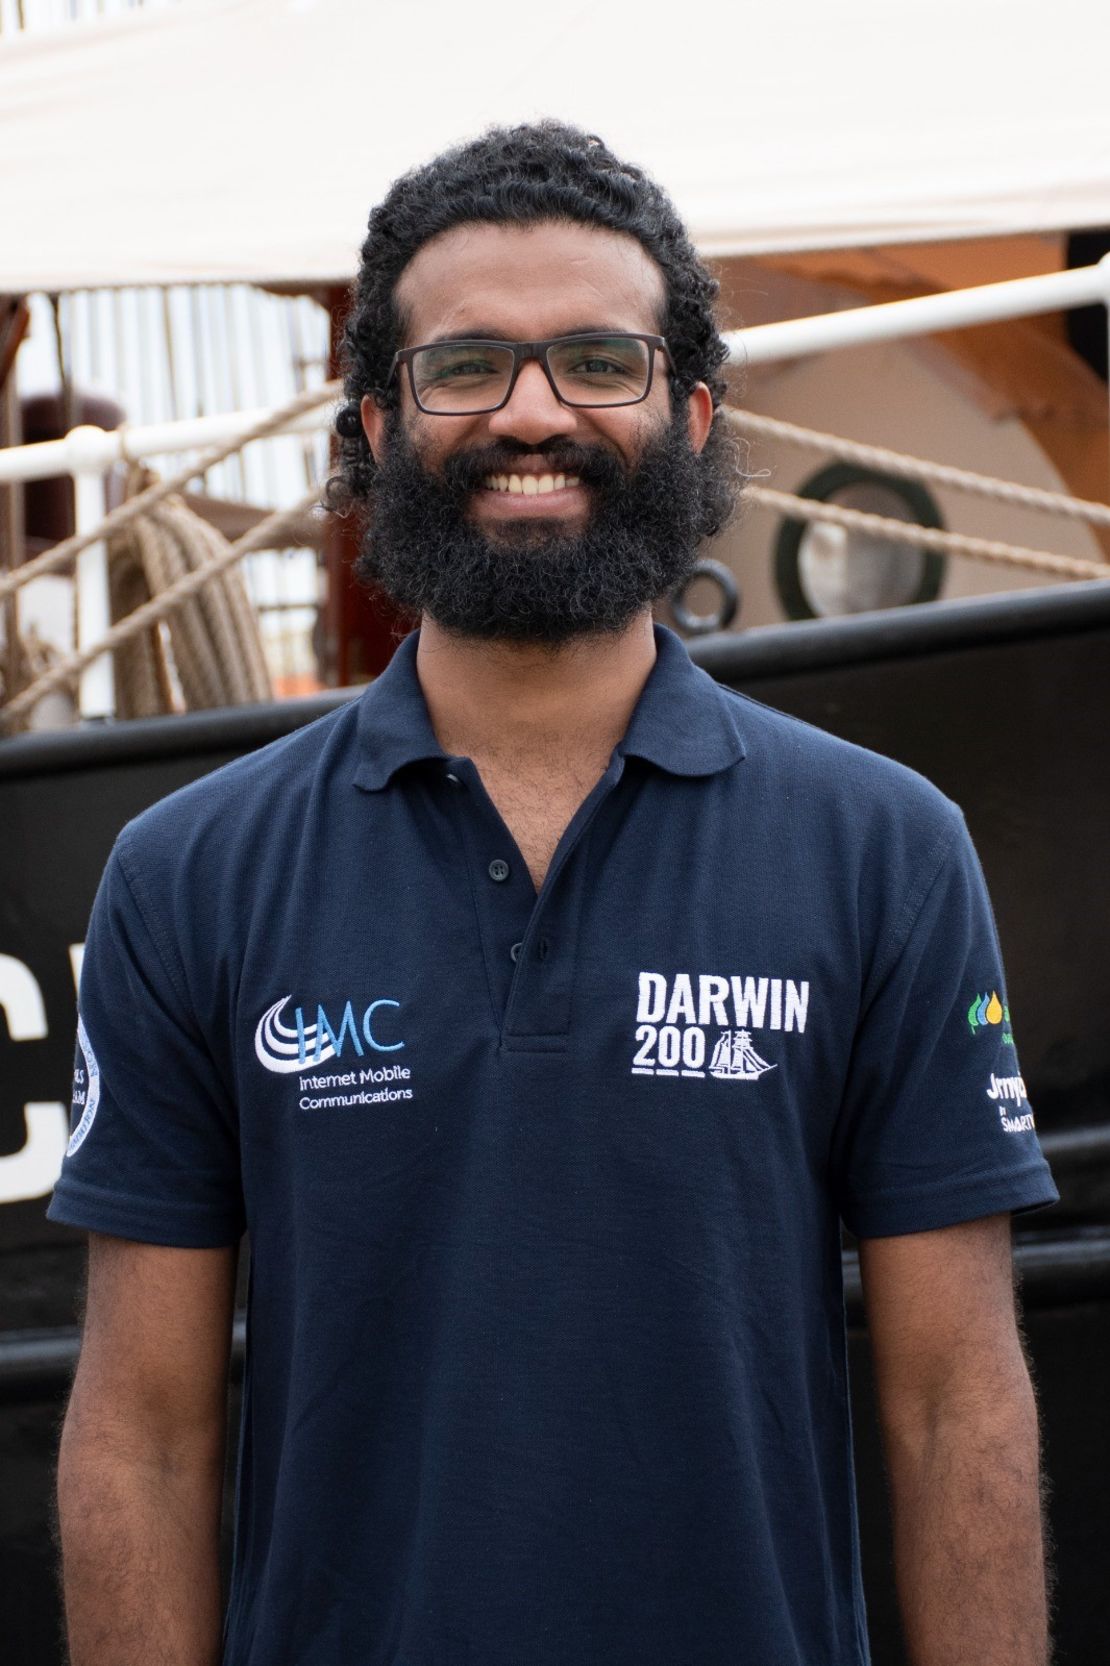 Darwin Leaders are conservationists chosen from around the world for their passion and enthusiasm towards saving the planet. Darwin Leader Joseph Roy wants to apply what he learns from Darwin200 to reintroduce the lion-tailed macaque species in India.